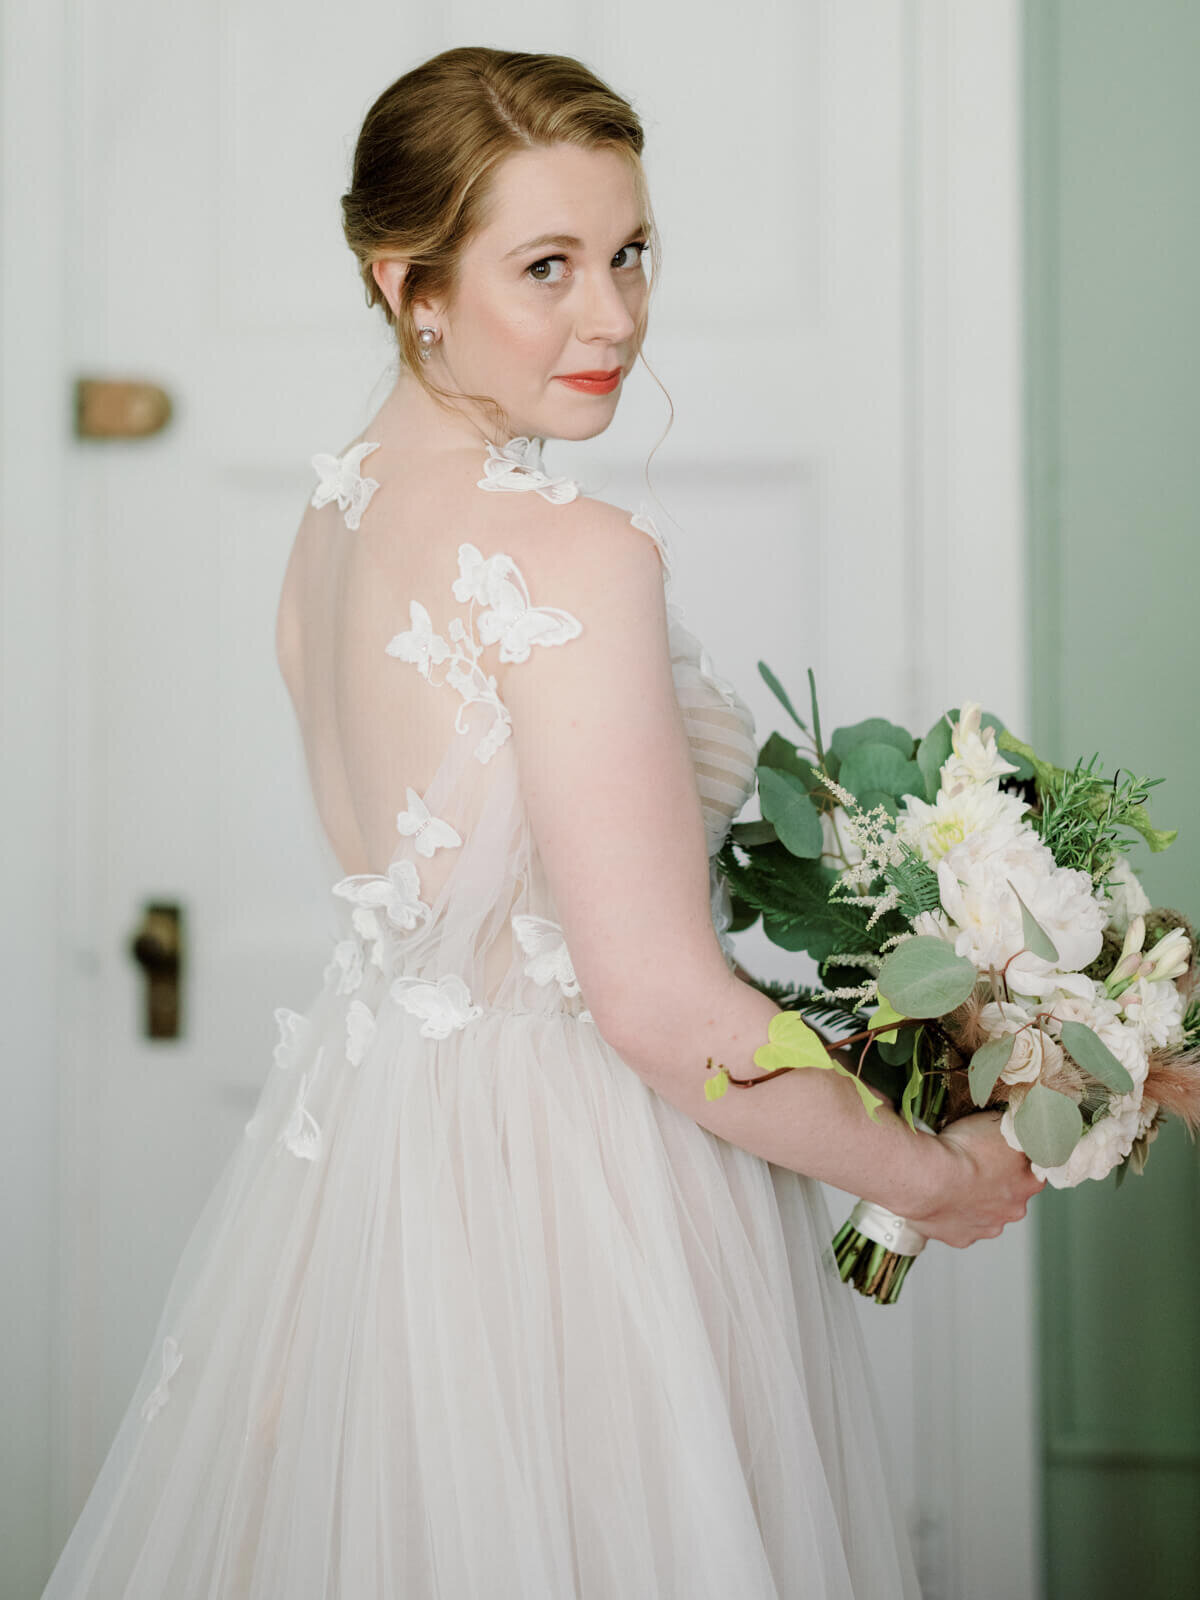 The bride is holding her flower bouquet while looking sideways, with her back showing